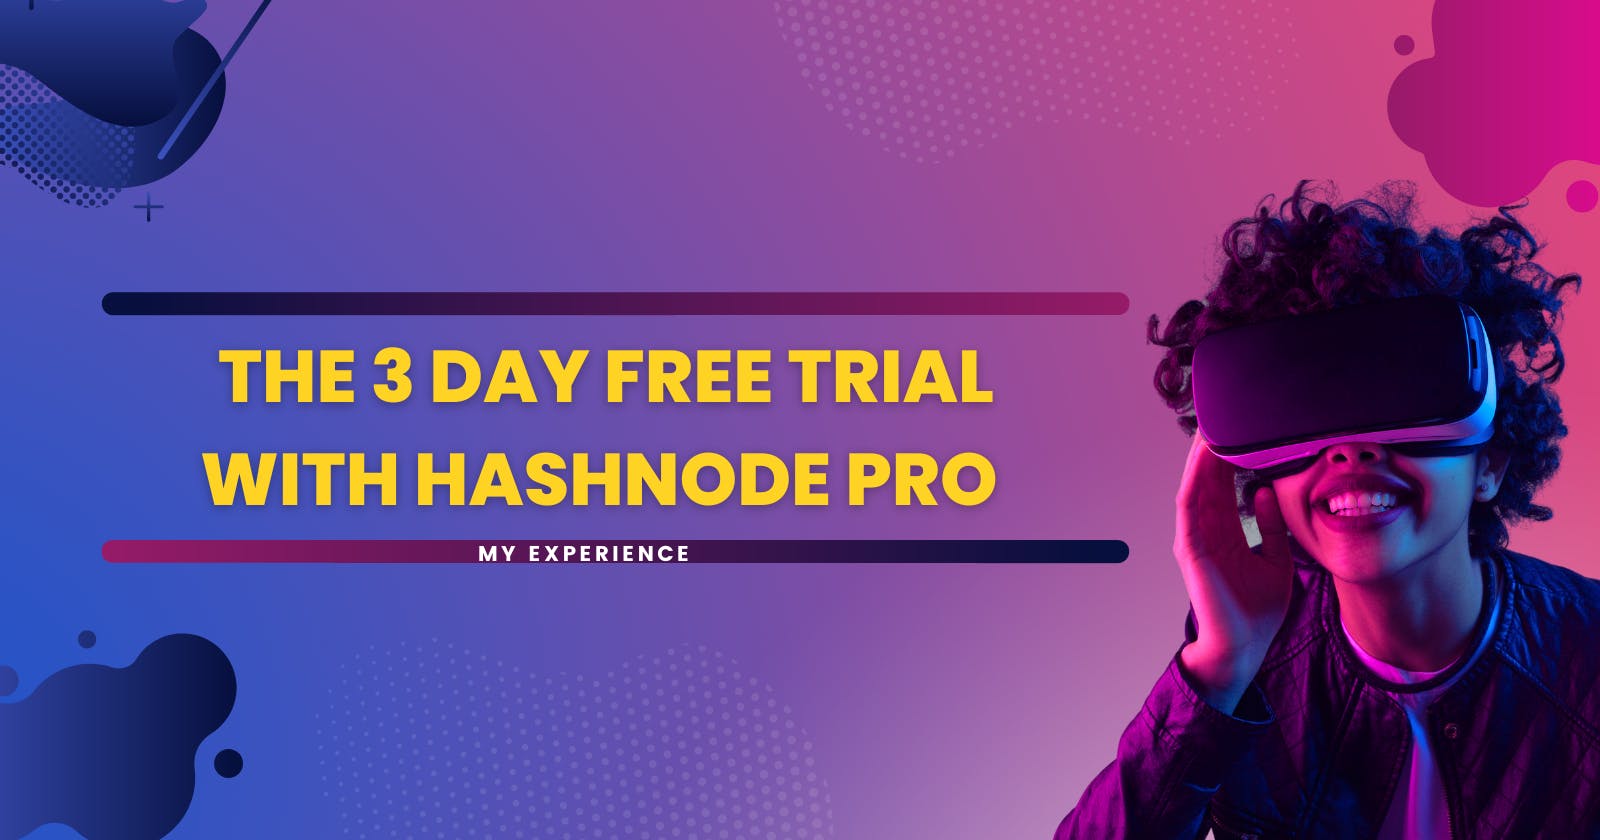 The 3 day free trial with Hashnode pro